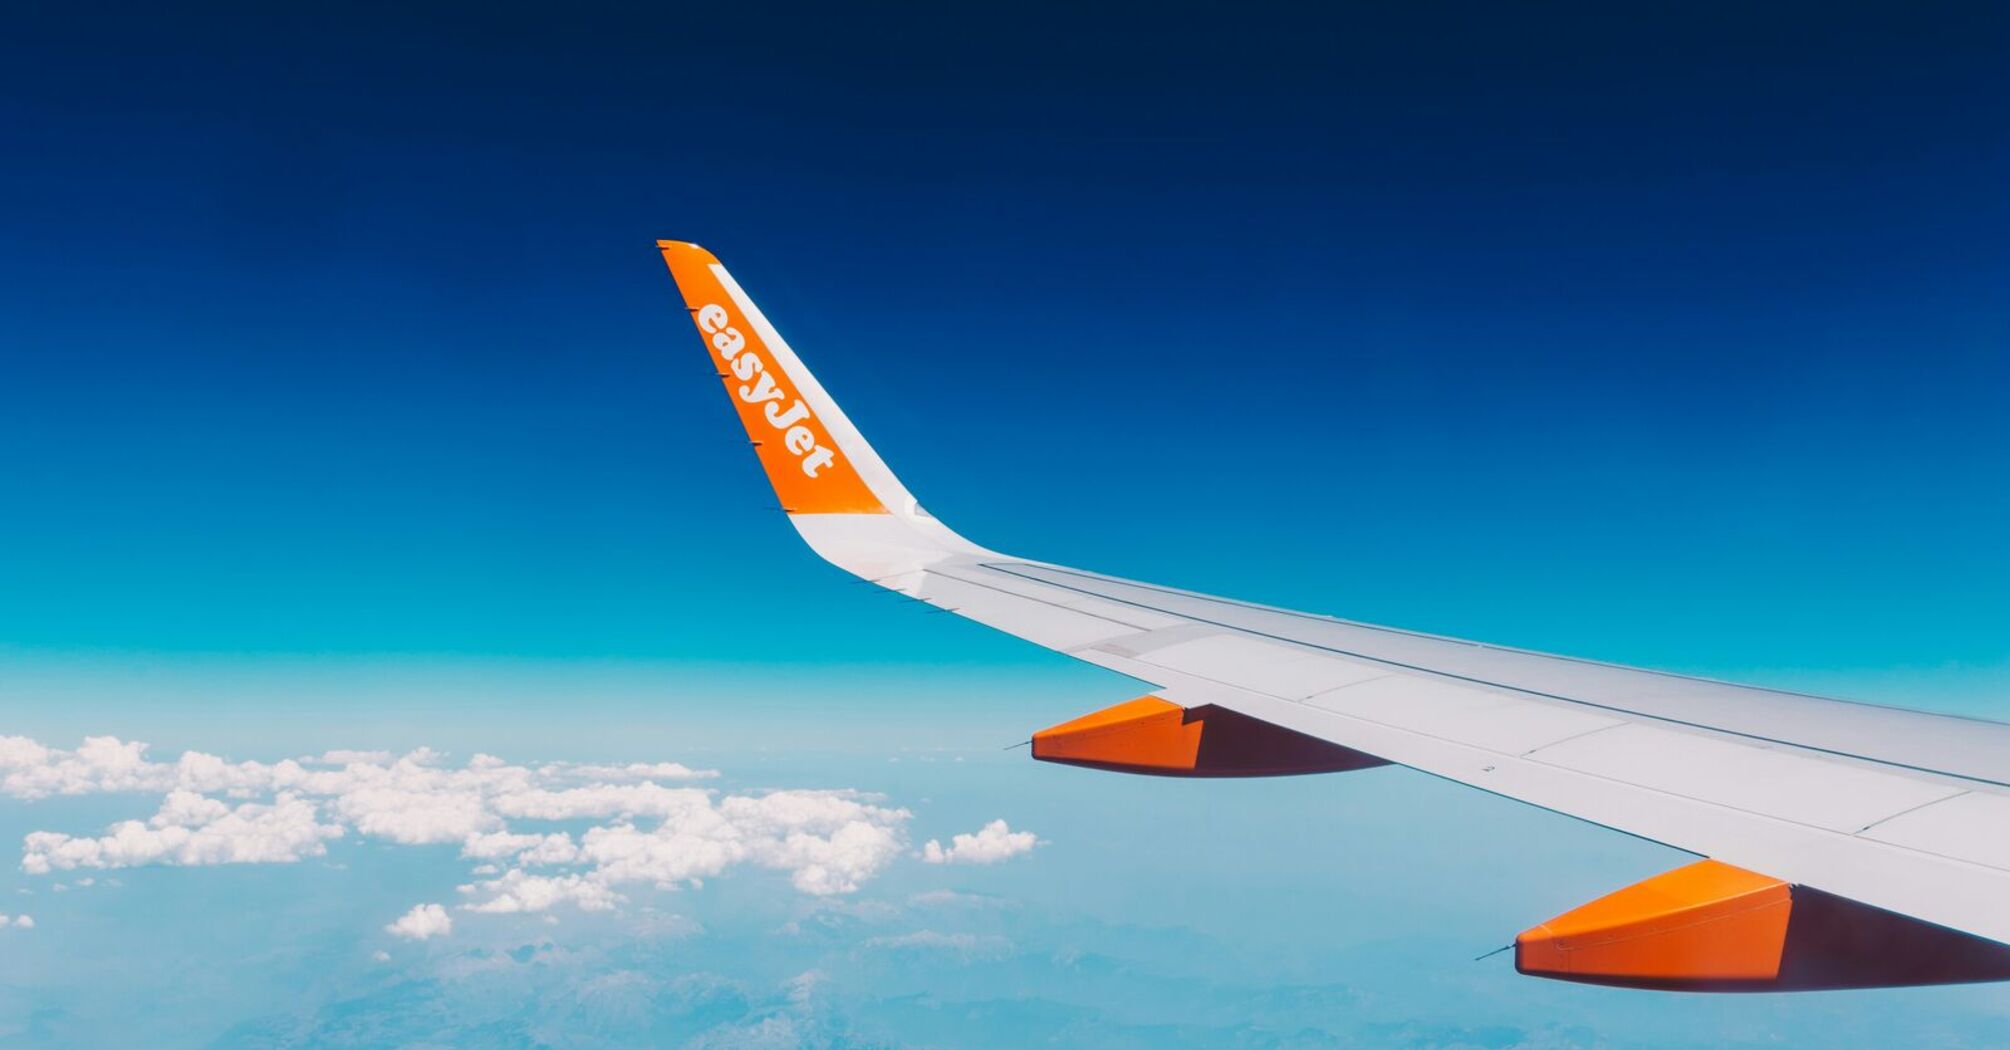 Wing of an easyJet plane against a clear sky